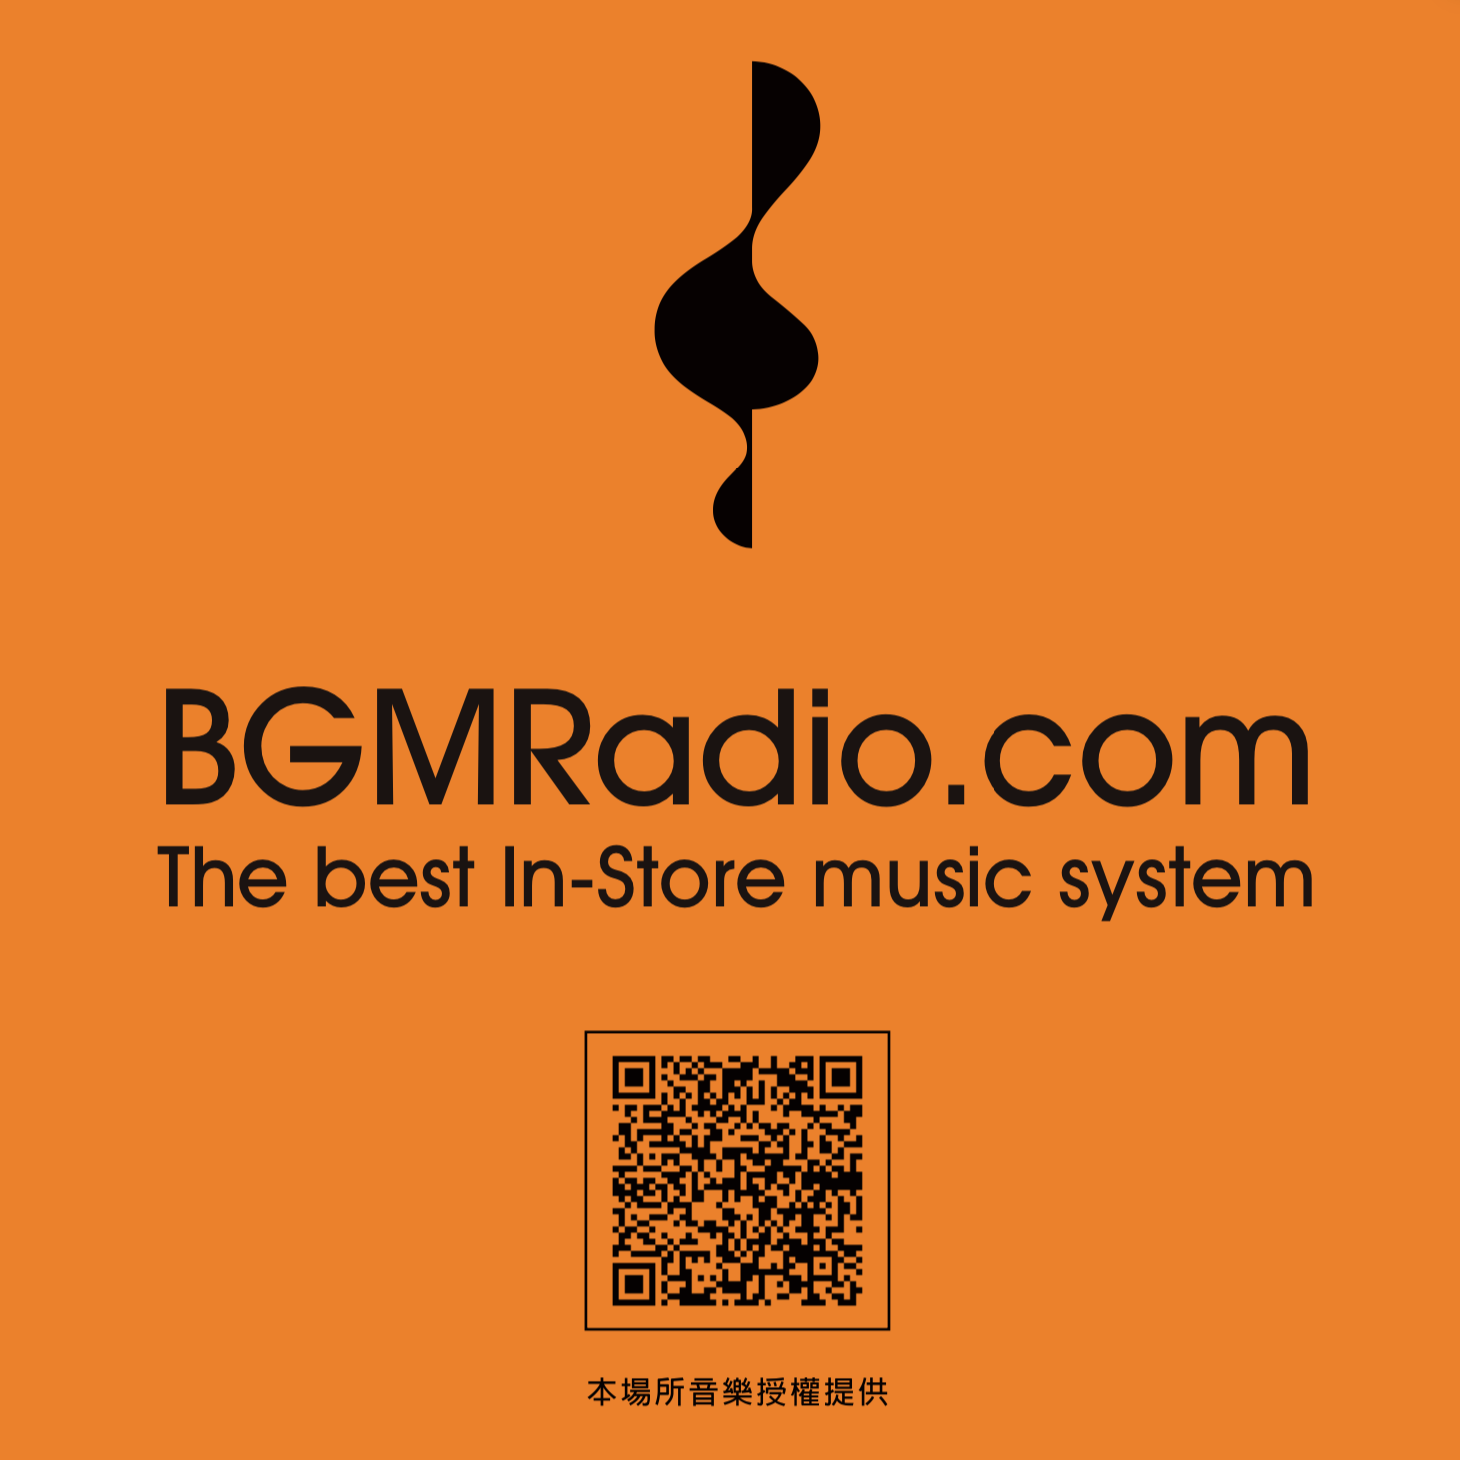 about BGMRadio